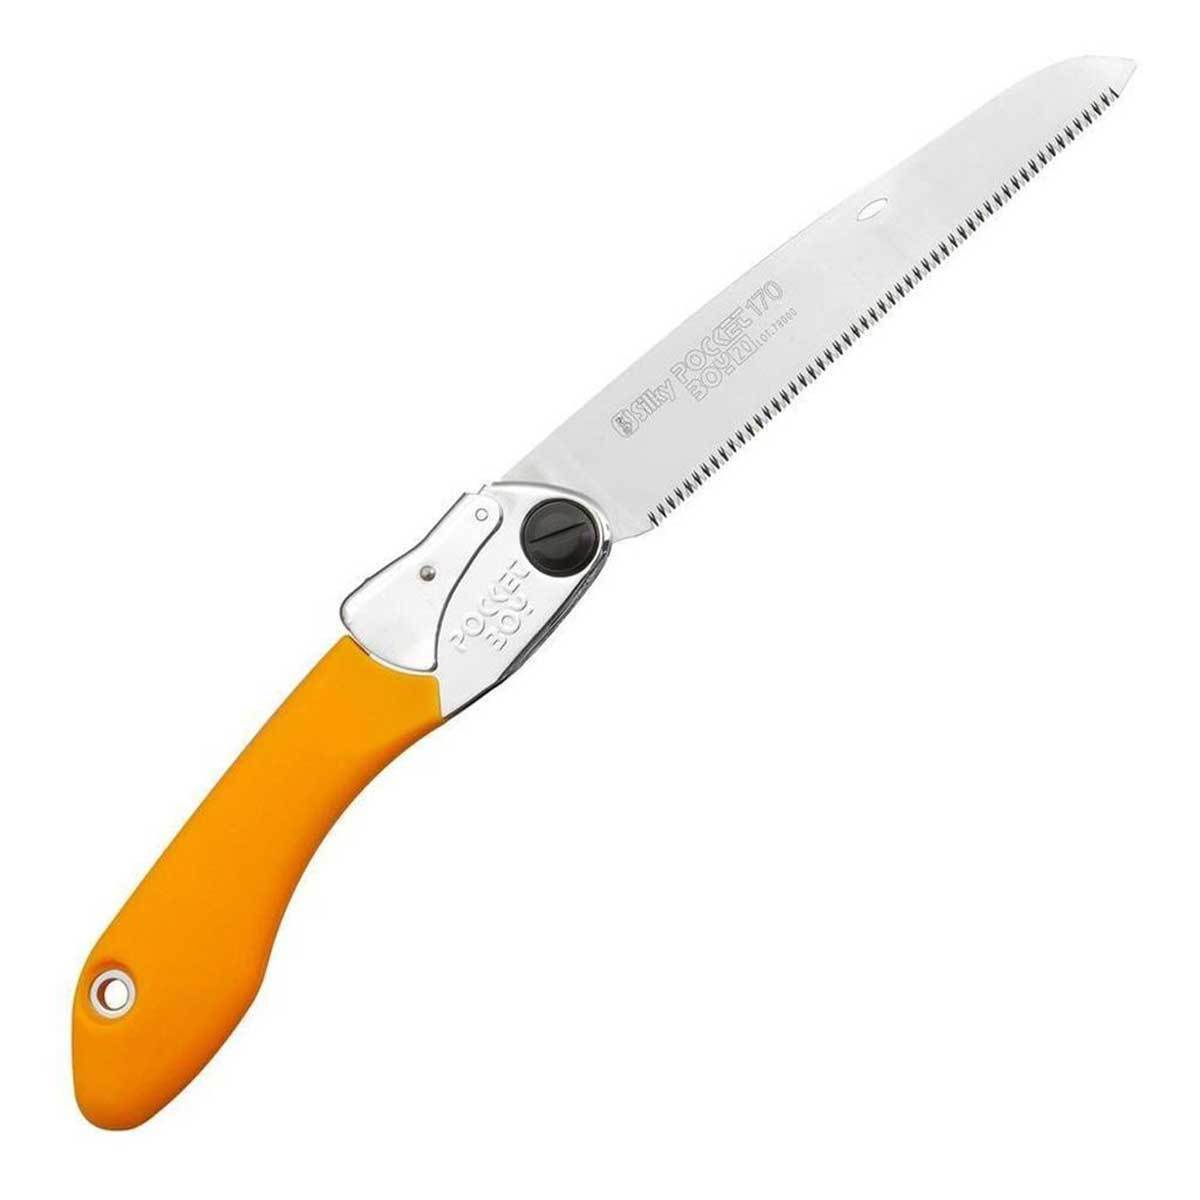 Silky Pocketboy 170 Folding Japanese Saw with orange grip and fine taper ground blade for cutting hardwood.